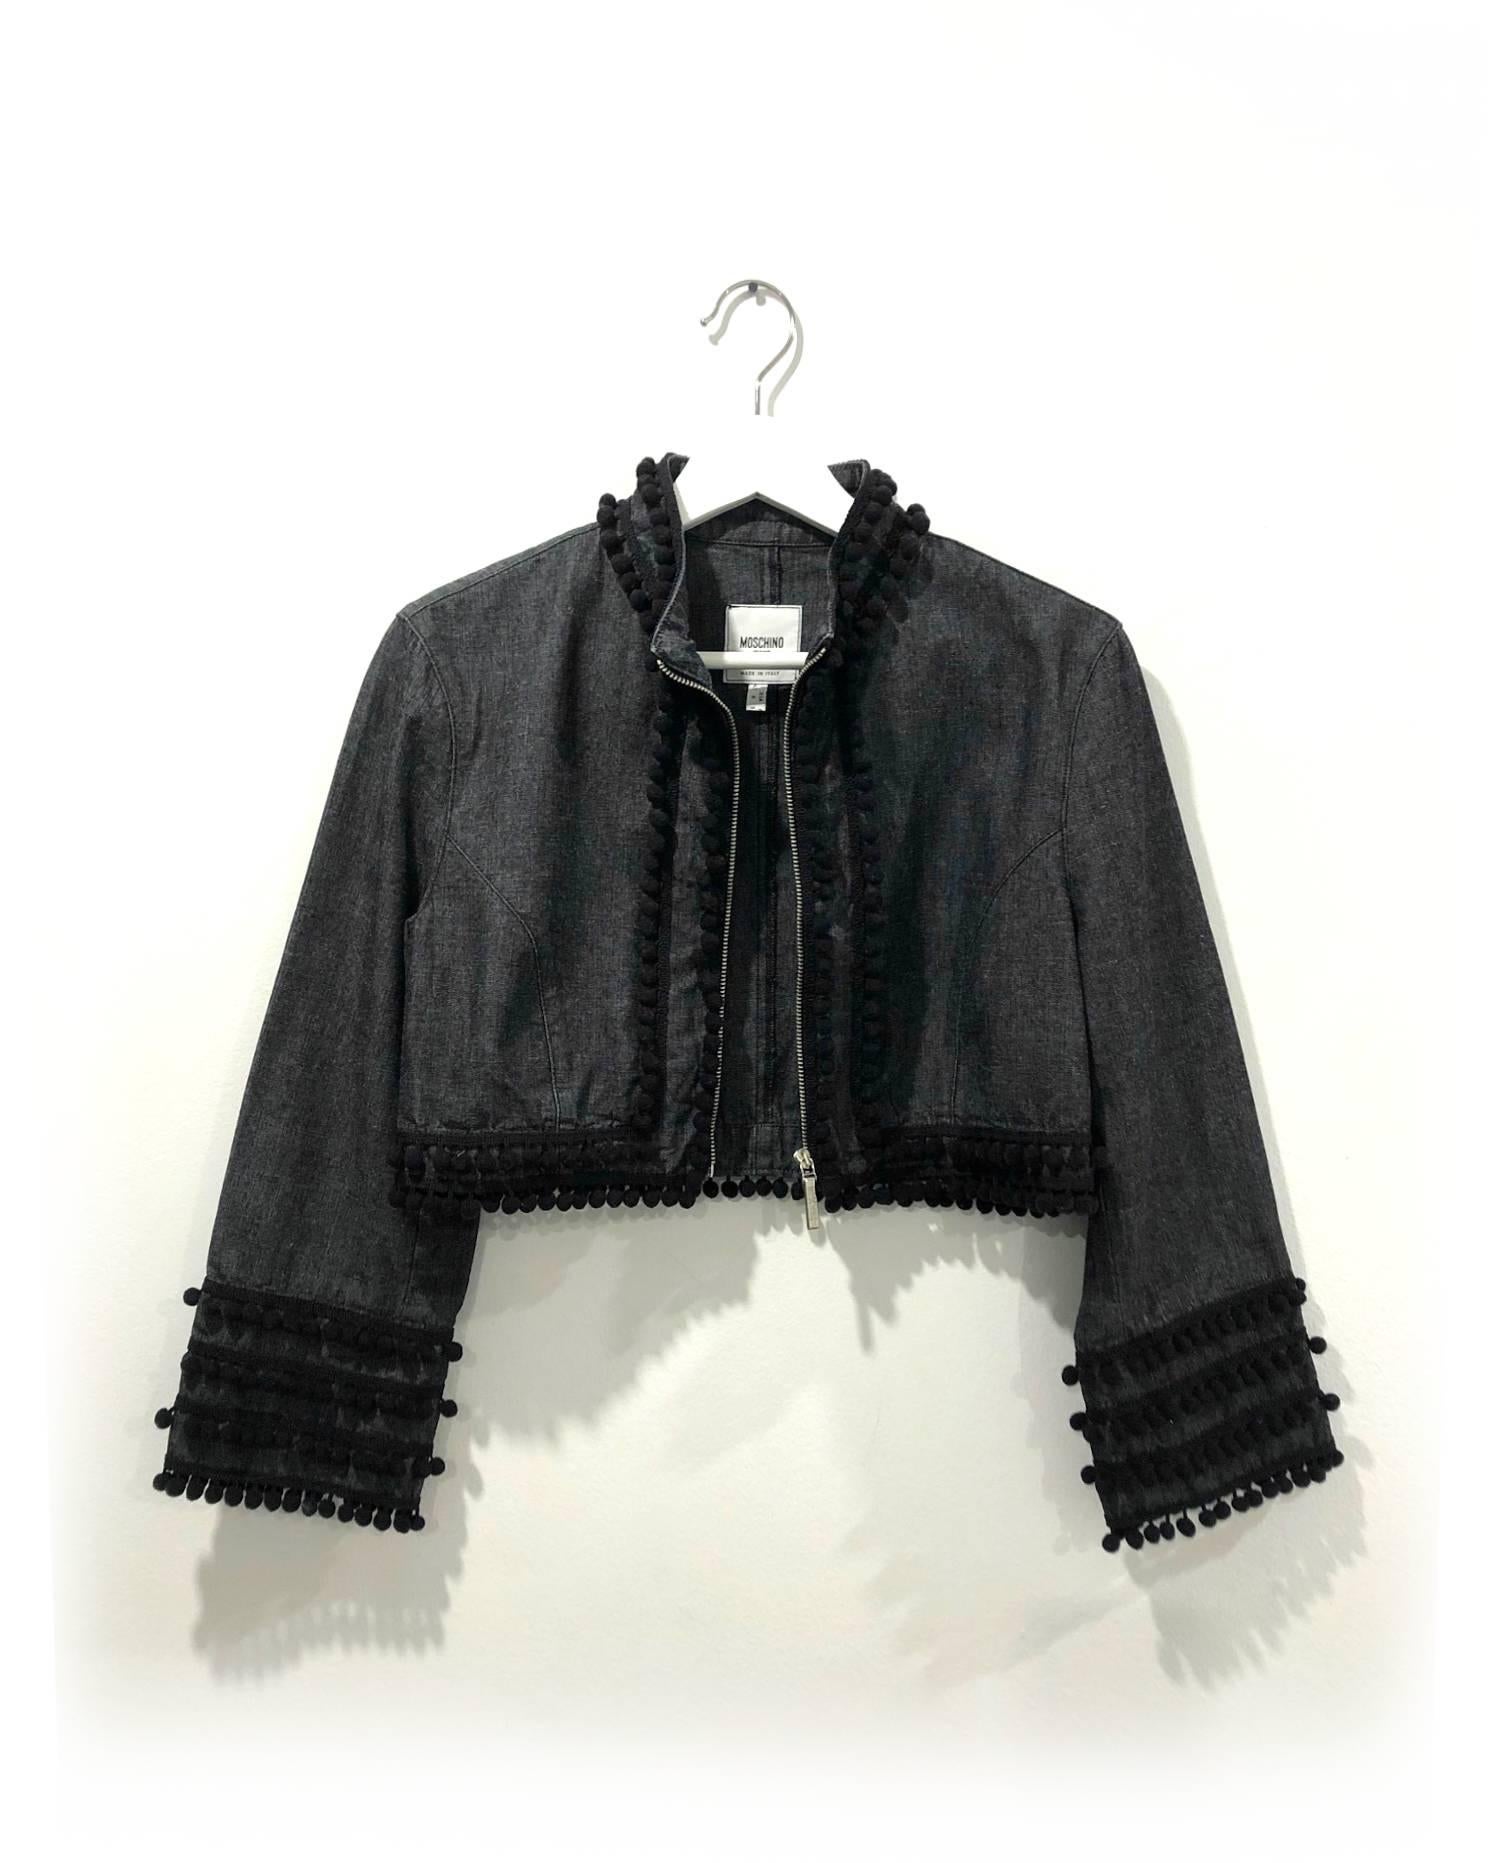 1990s Moschino cropped denim pom pom bolero, dark blue/grey neutral denim colour with black Spanish Matador-esque black pom-pom trim all the way round the edges and several rows on the sleeves. Cropped body with zip fastening with branding on